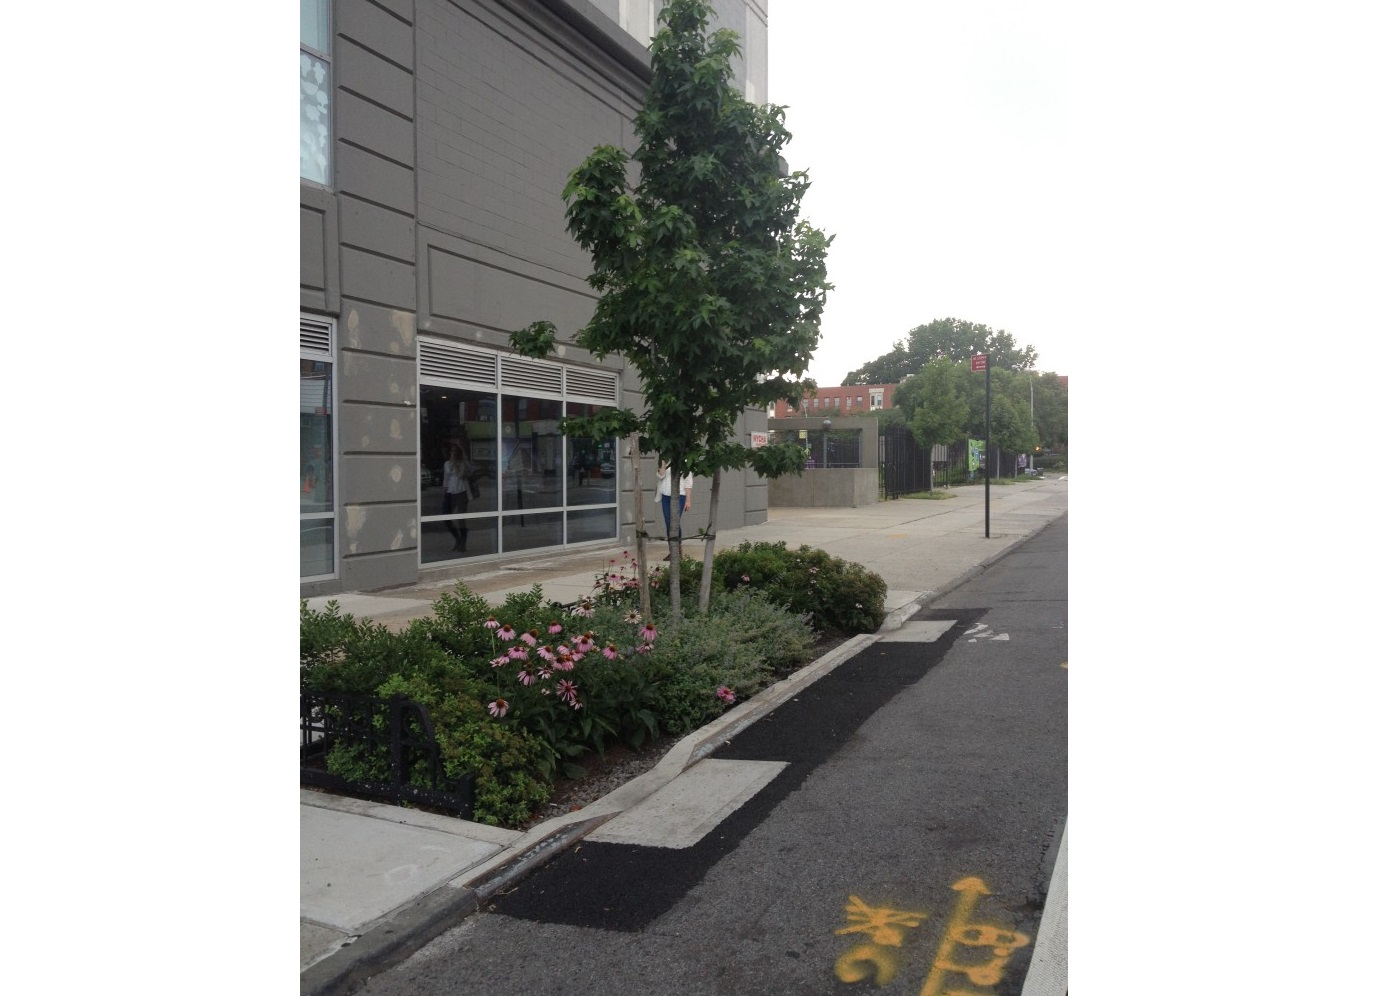 NYCDEP has released the locations of over 300 bioswales.